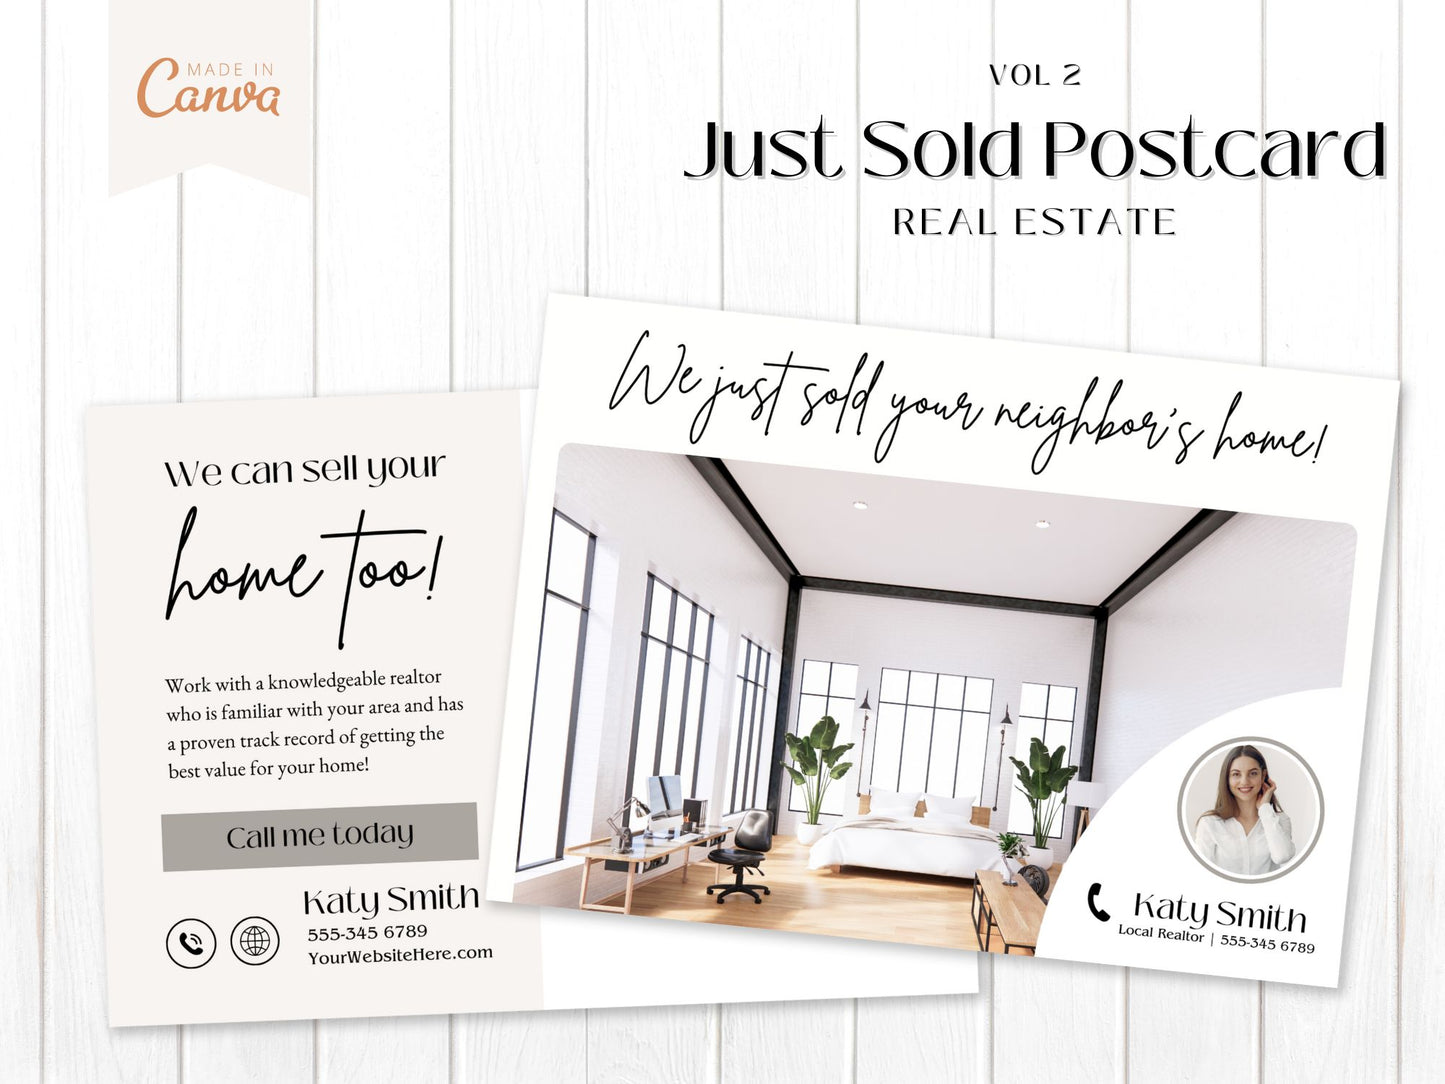 Just Sold Real Estate Postcard - Celebrate your successful transactions with vibrant postcard announcements.